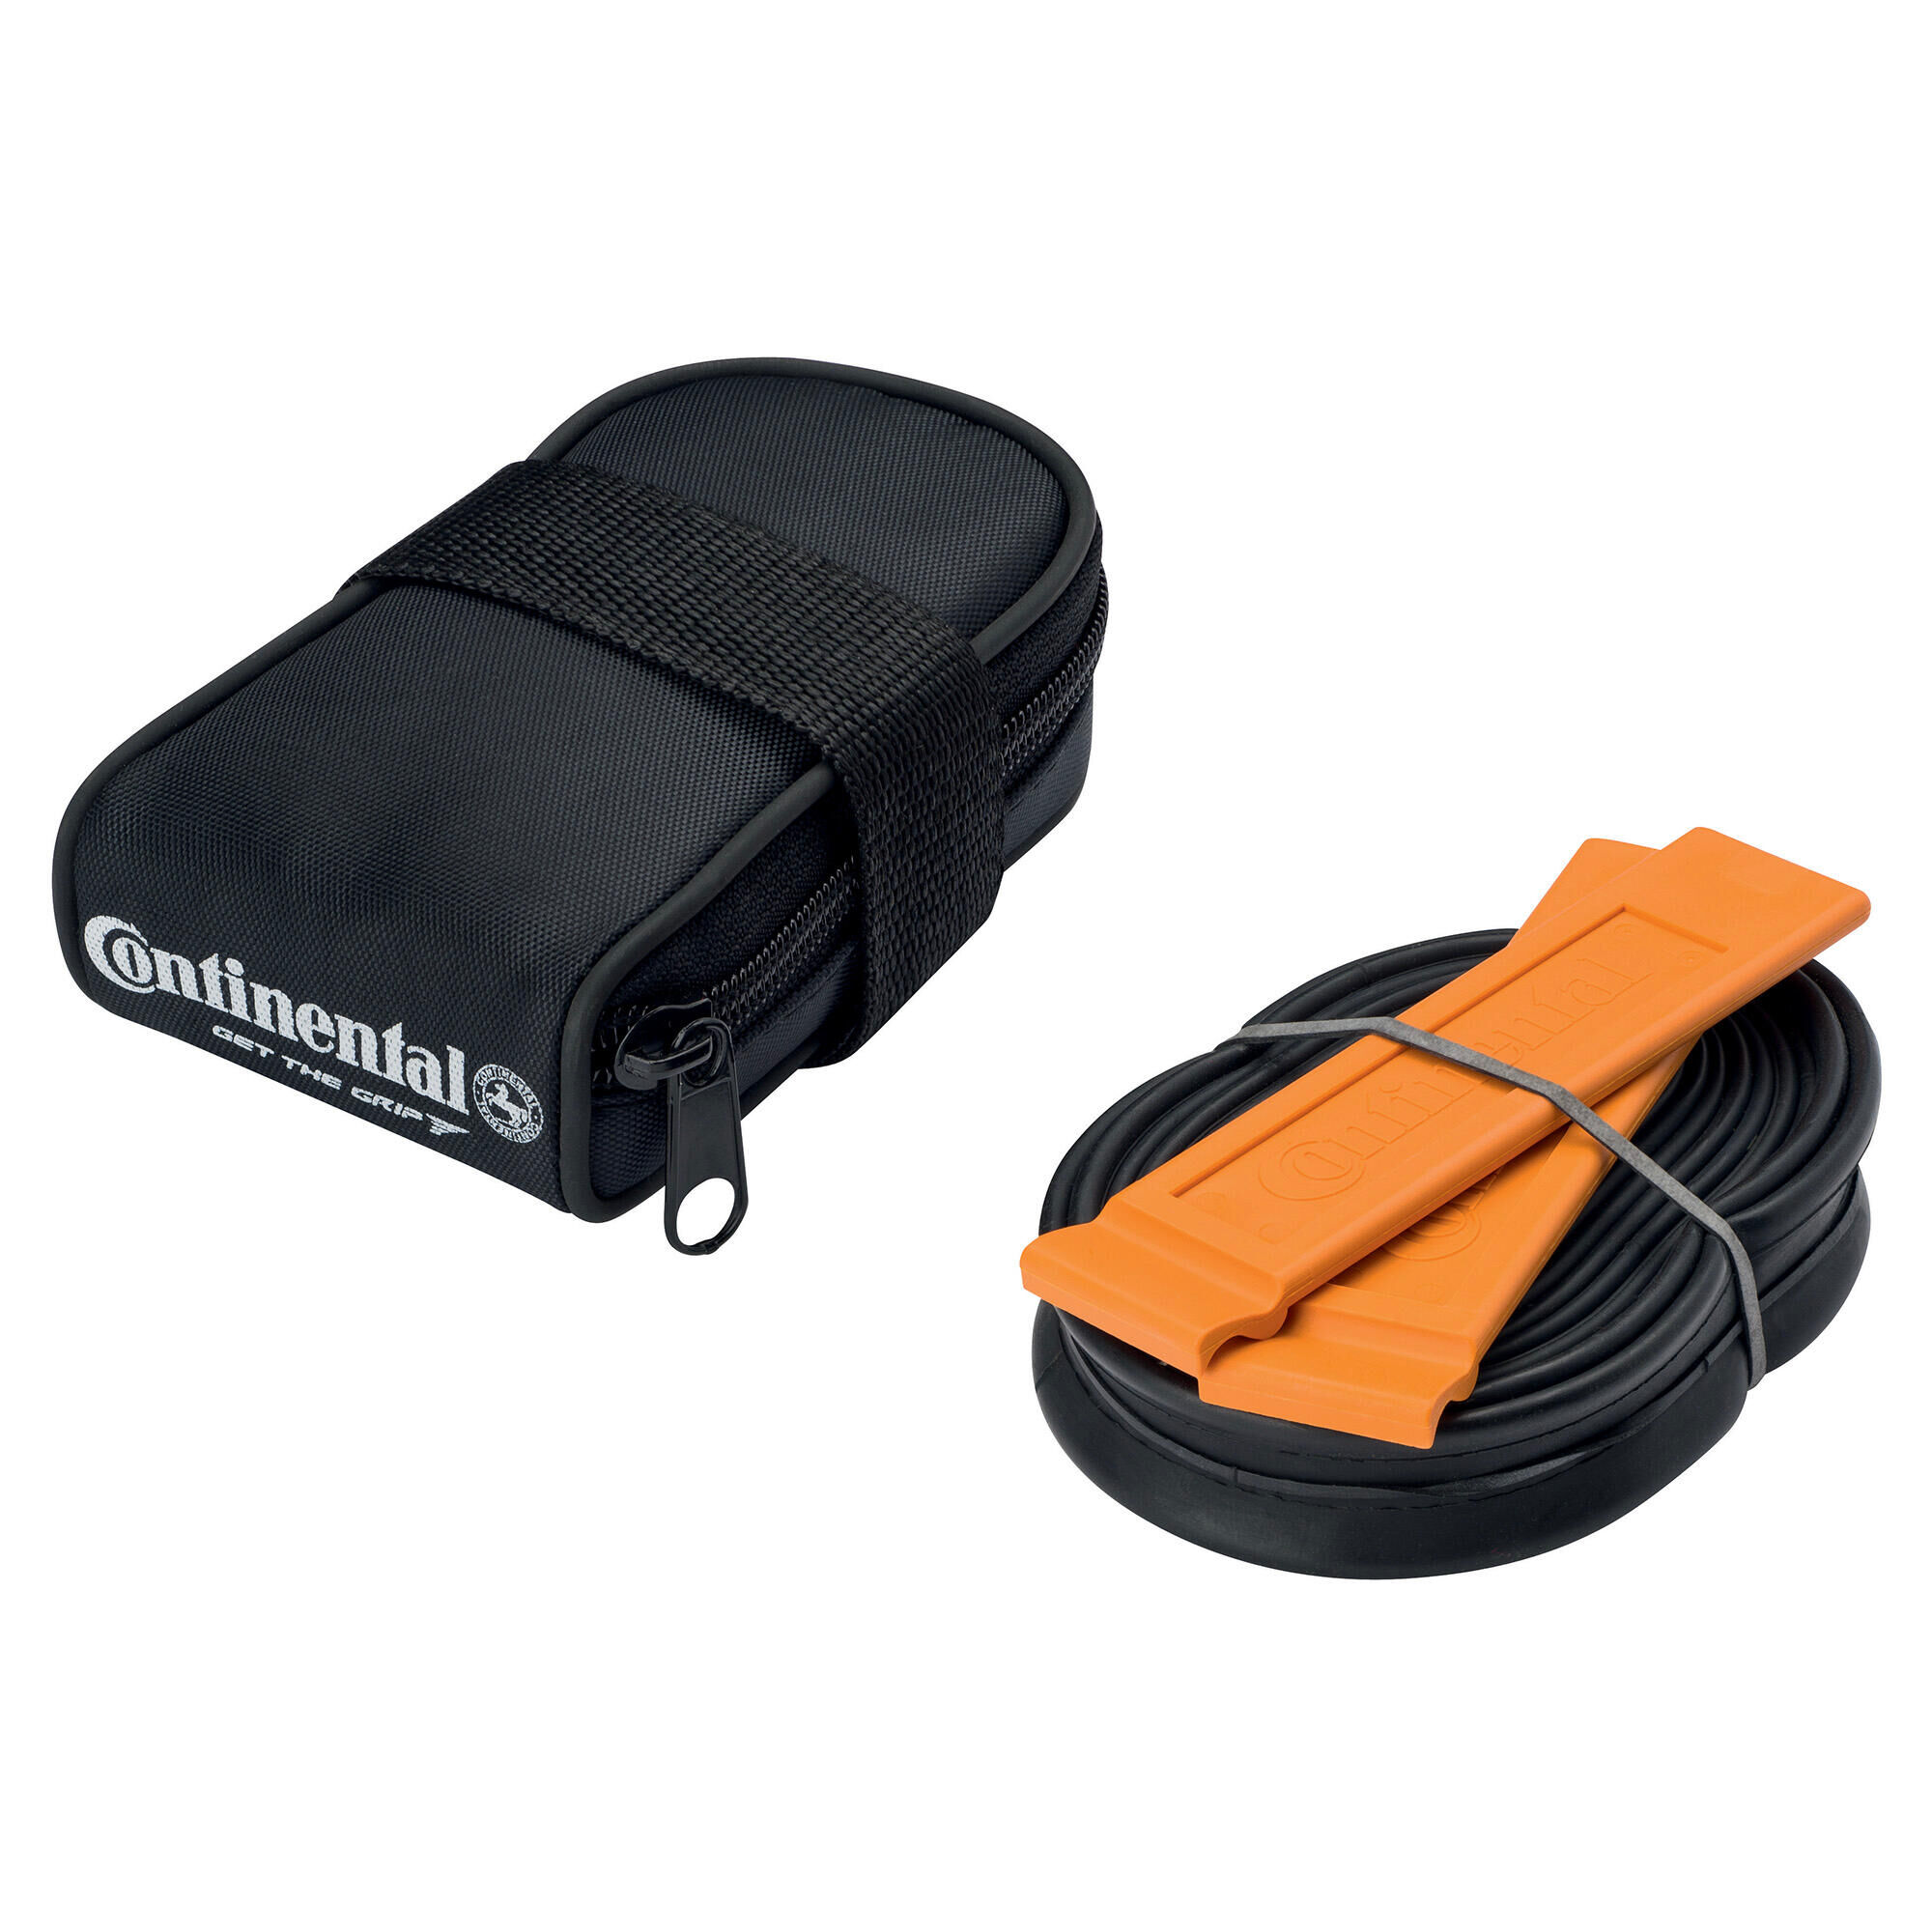 CONTINENTAL Road Saddle Bag with Race 700 x 20-25 Presta 60mm Valve Tube and 2 Tyre Levers